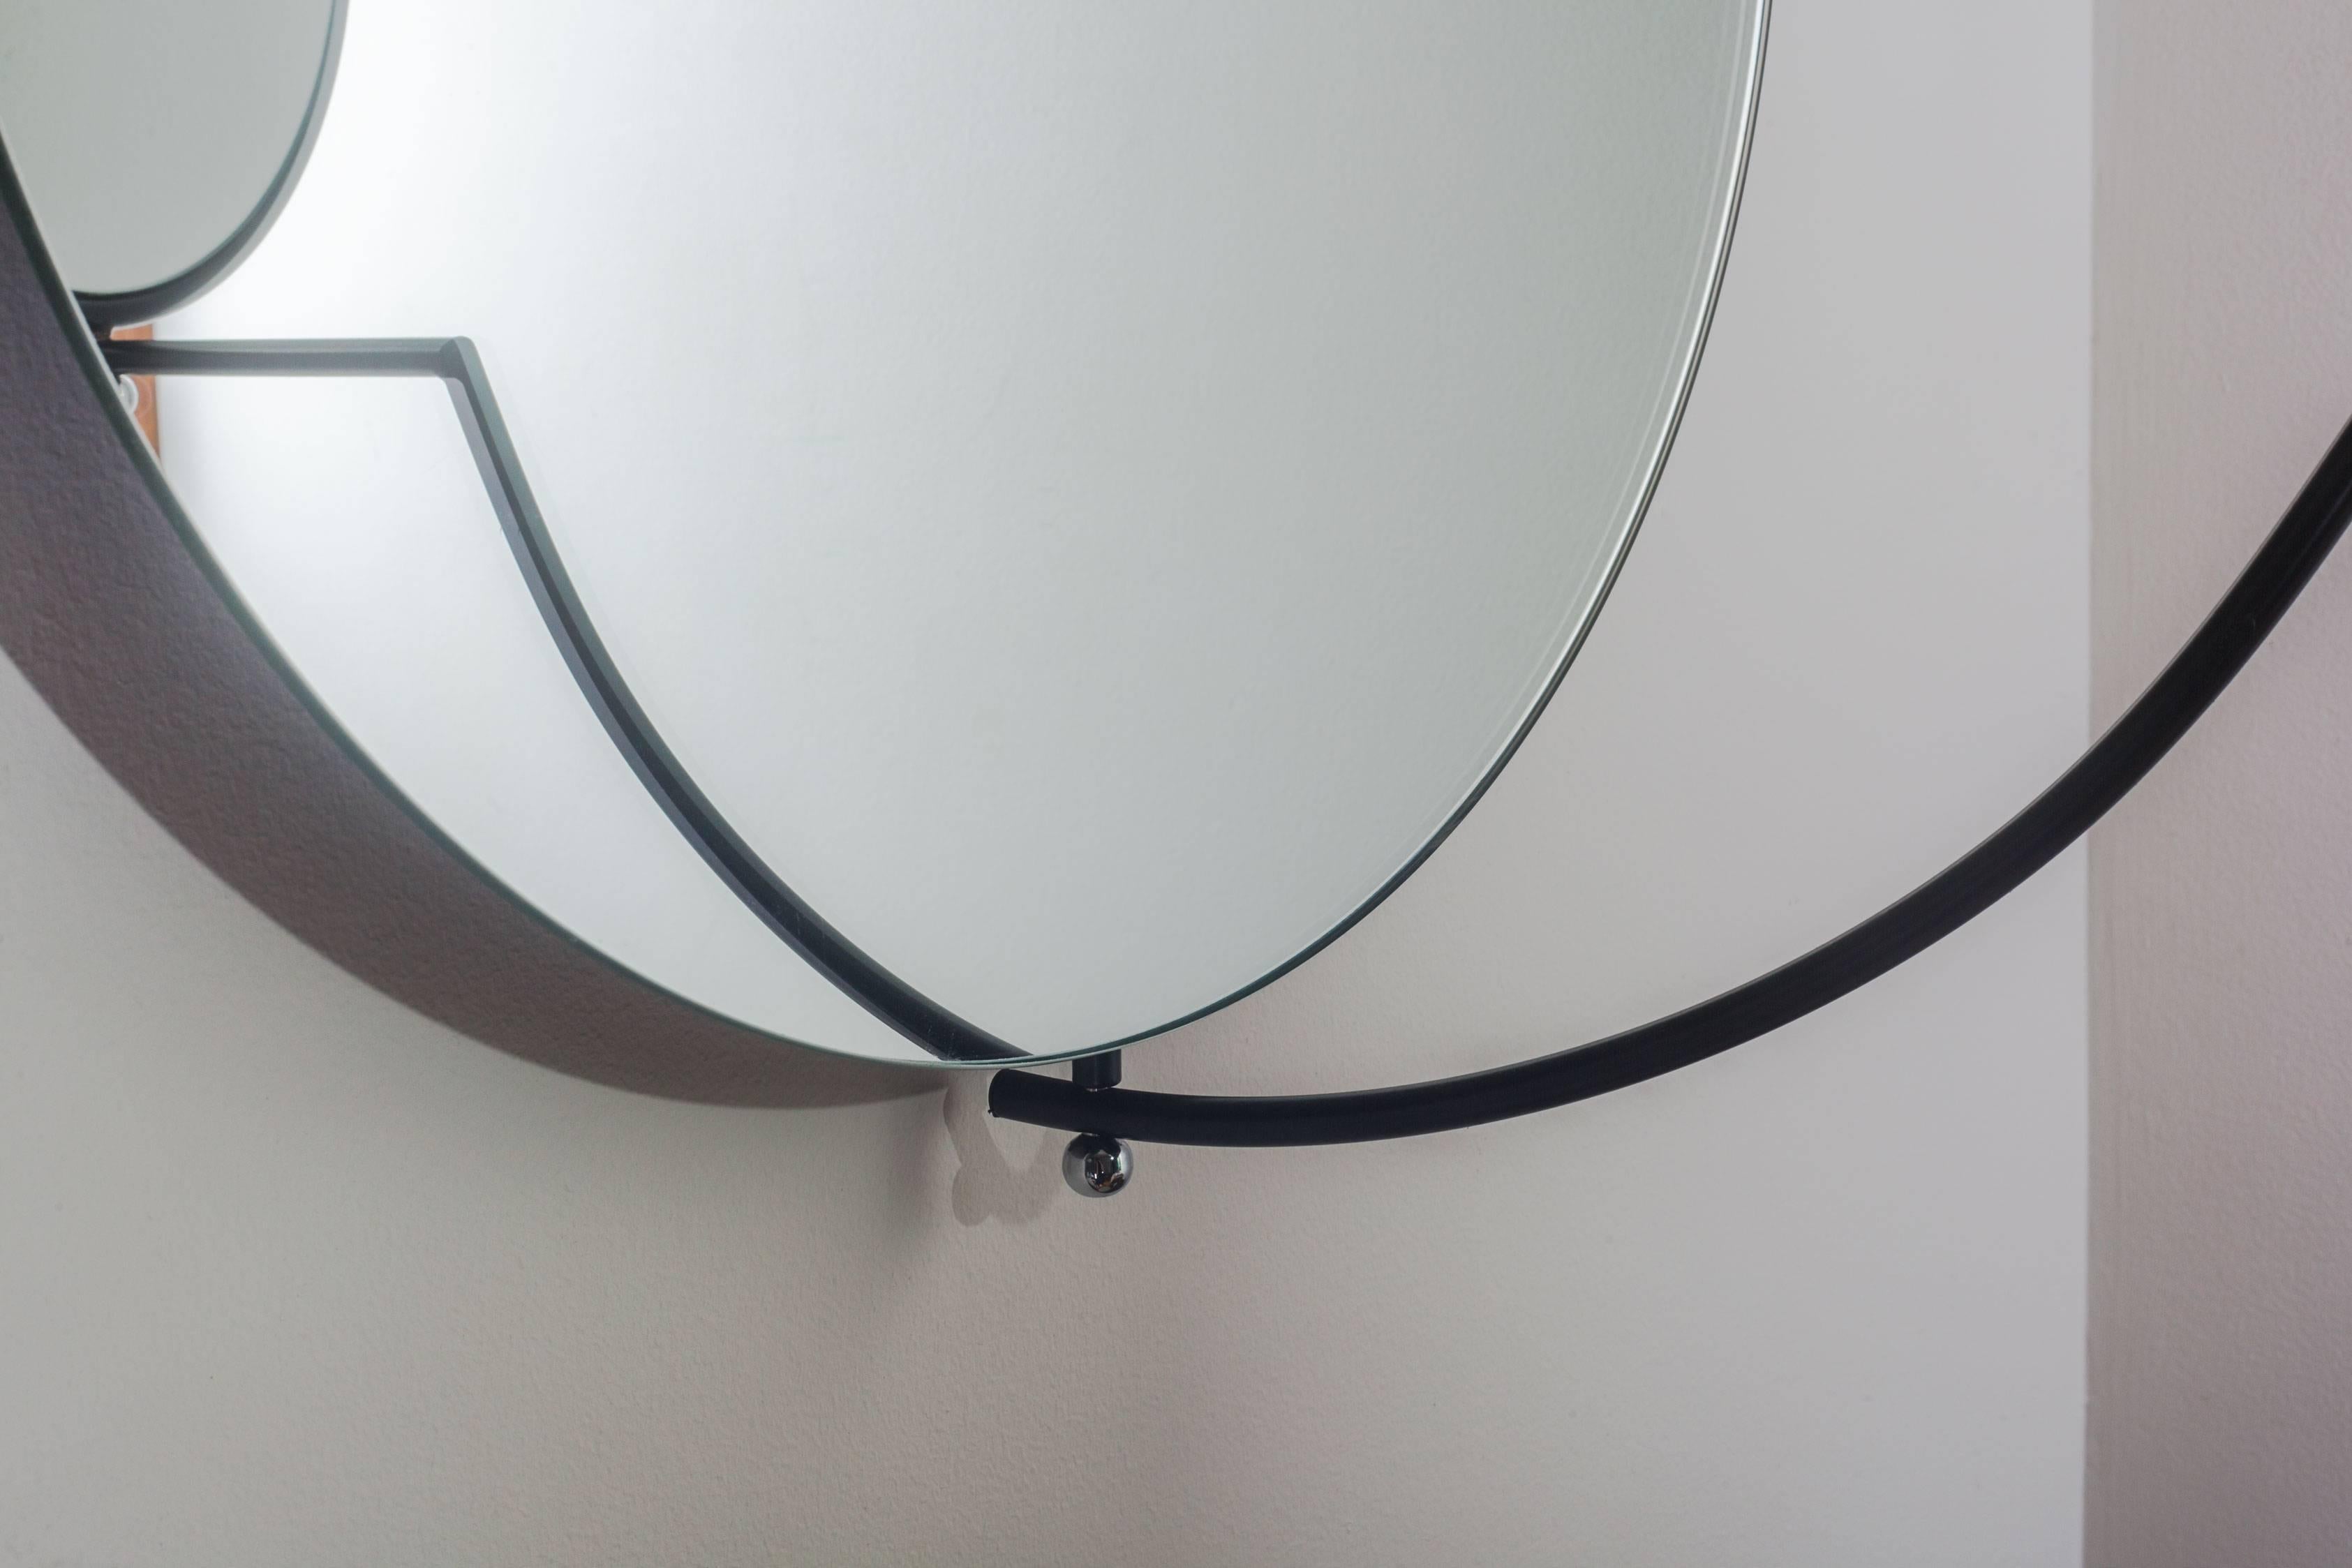 Round double wall mirror by Rodney Kinsman for Bieffeplast, Italy. The large main mirror is fixed to the wall with a built in backplate that allows for horizontal hanging as pictured, or vertical hanging. The mirror's steel frame pivots at 180